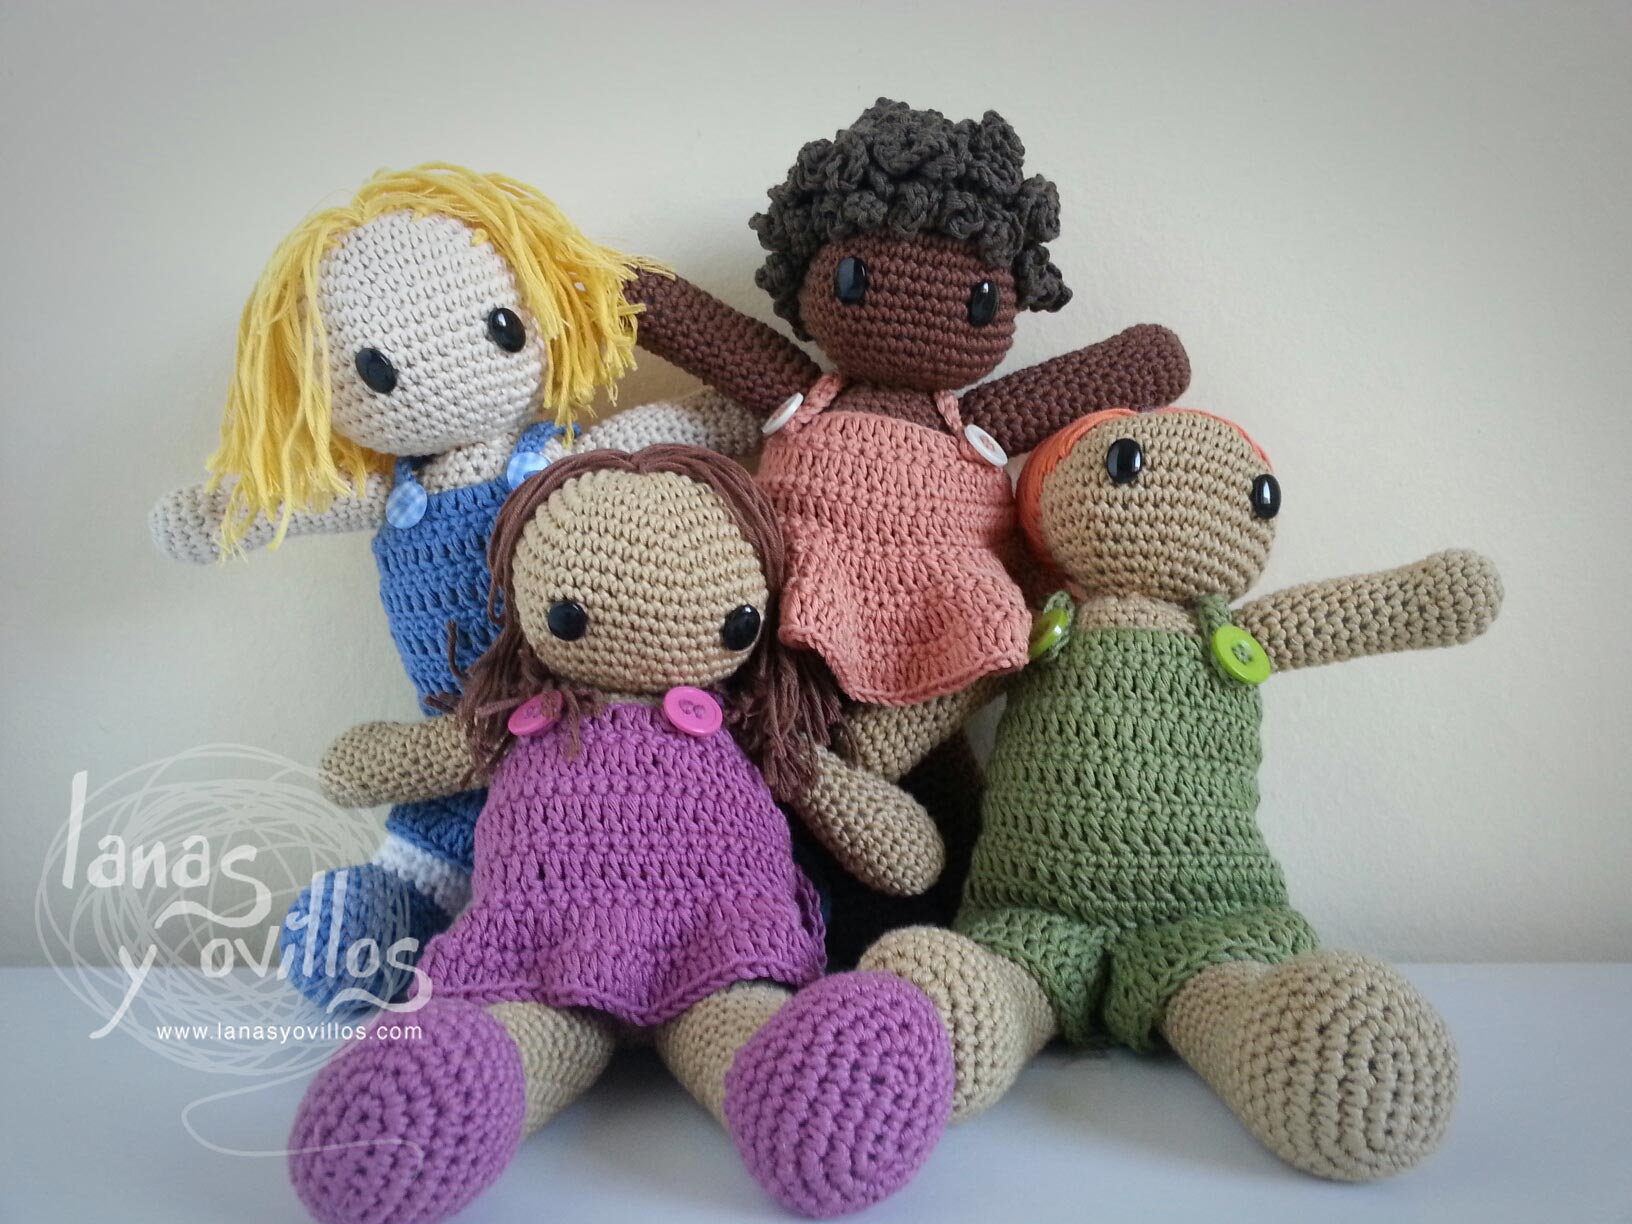 doll amigurumi free written pattern with video tutorial step by step